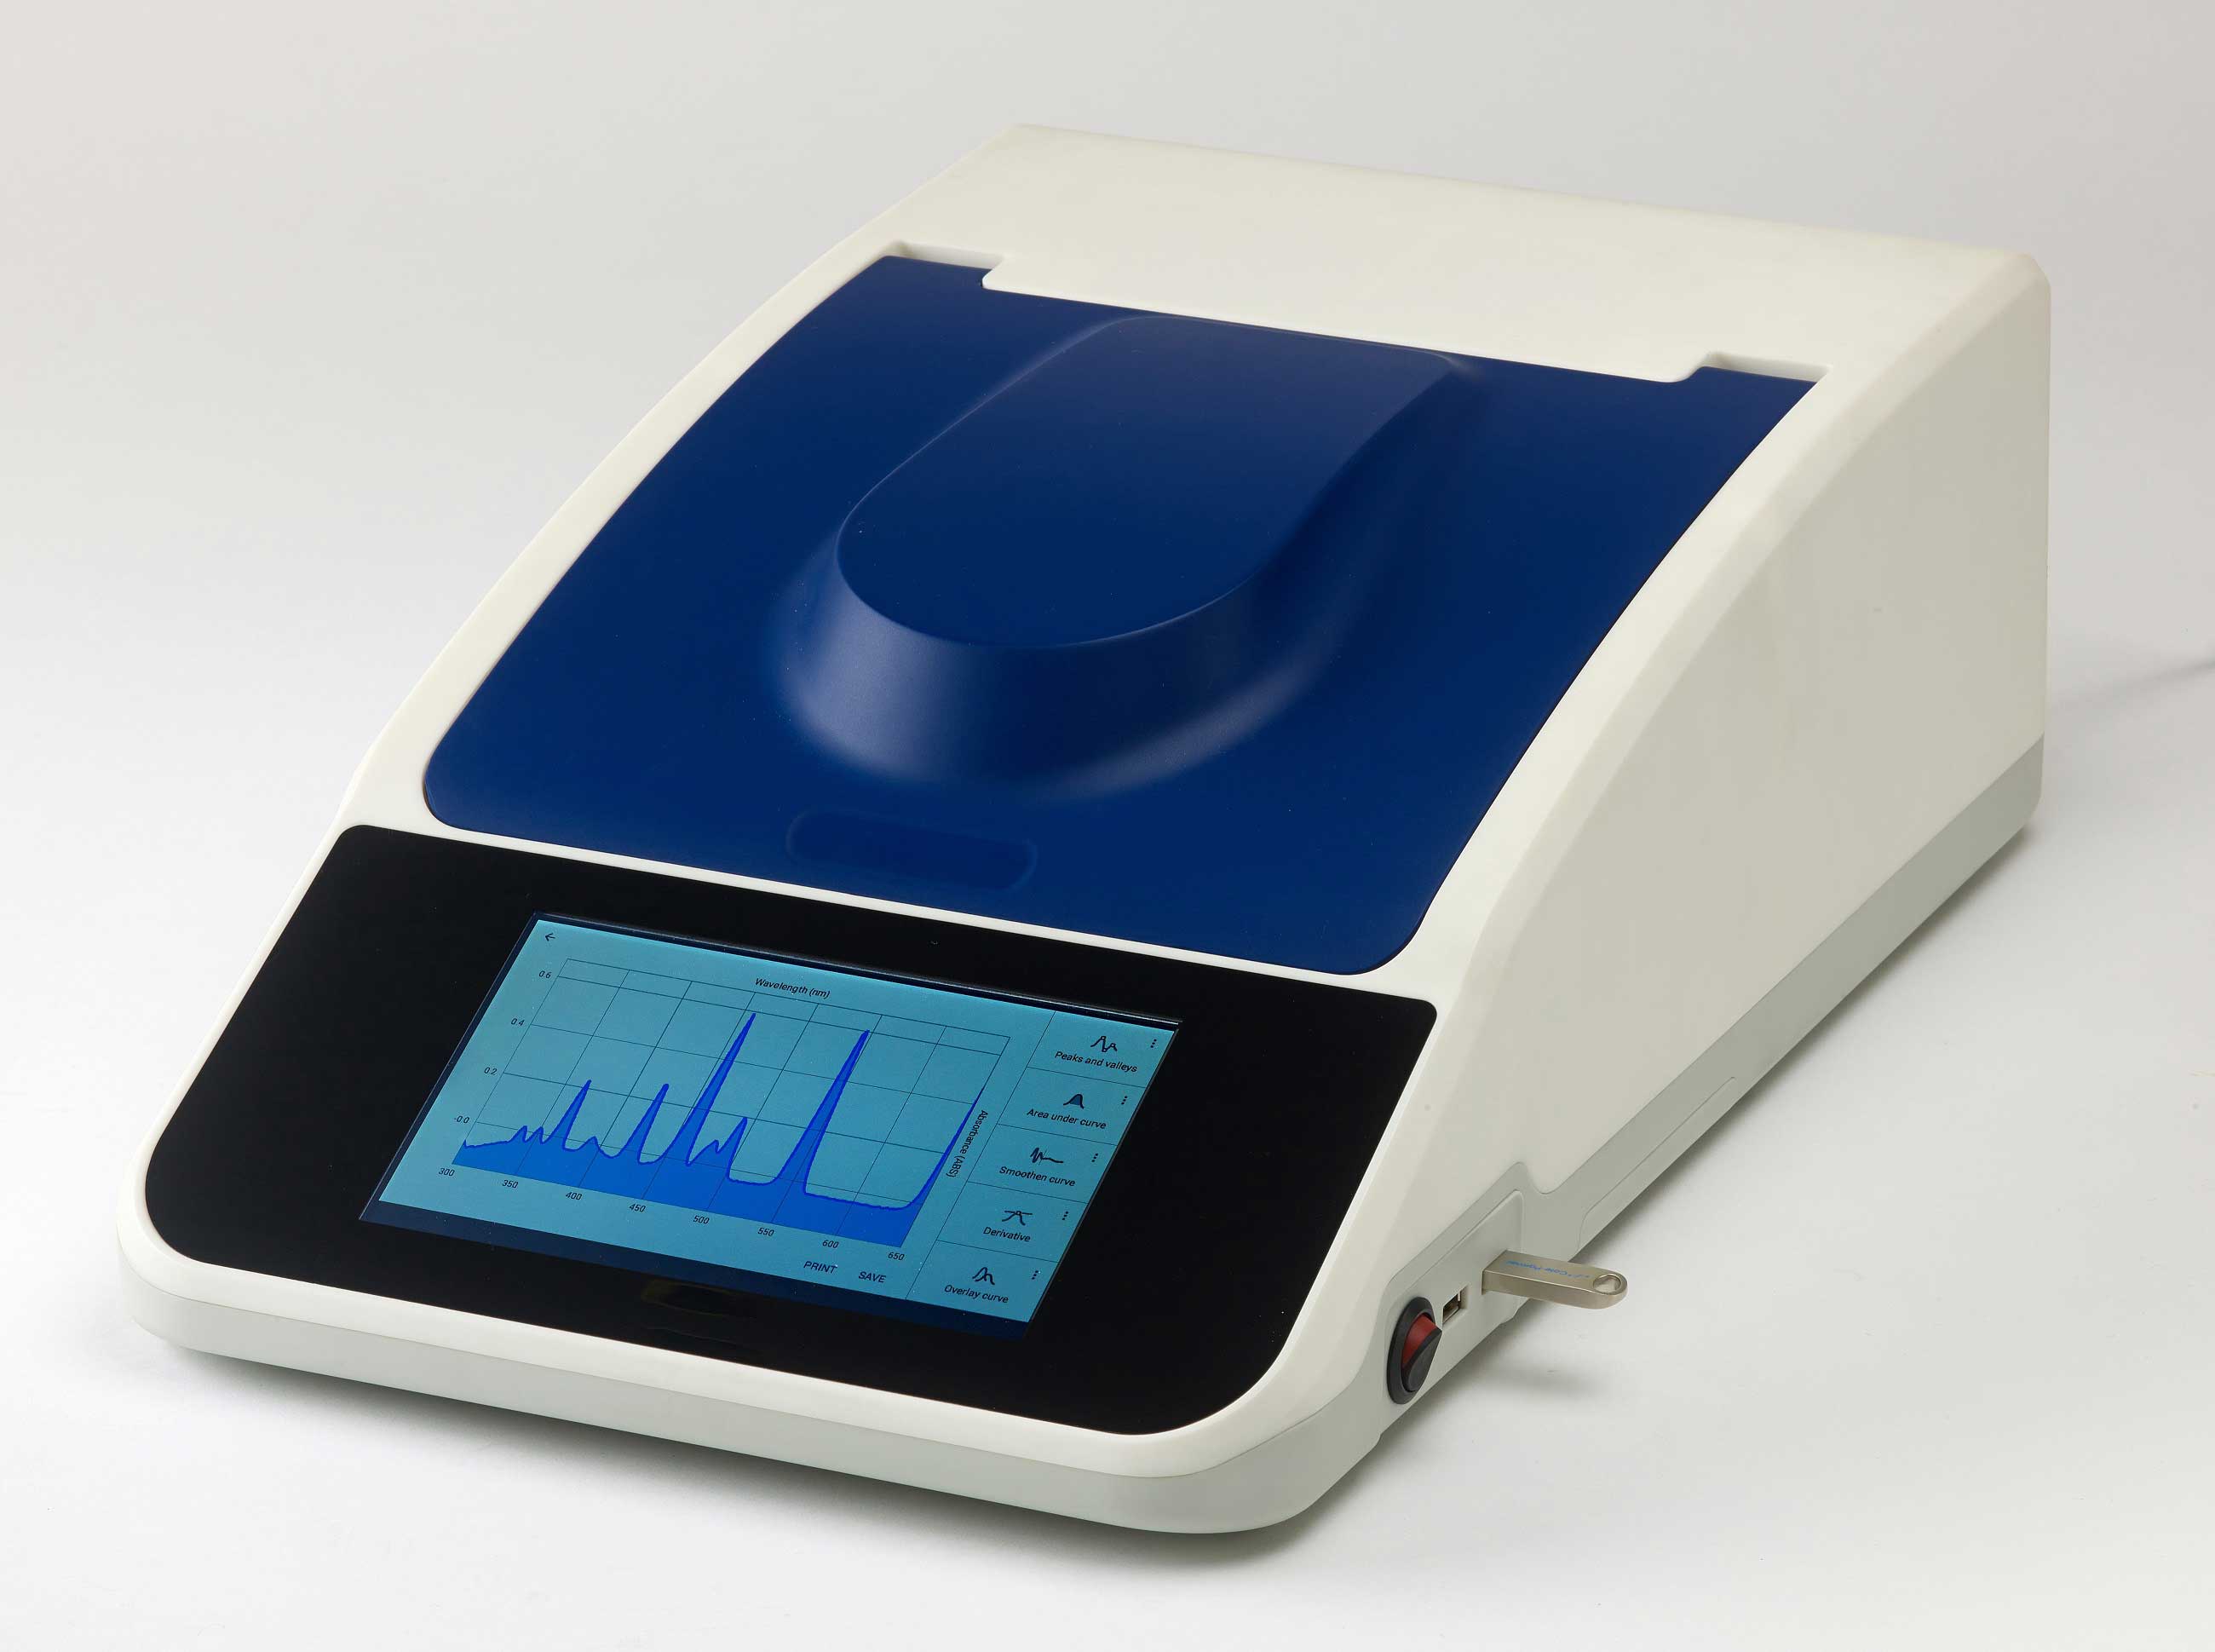 7410 visible and 7415/7615 UV-Visible scanning spectrophotometers